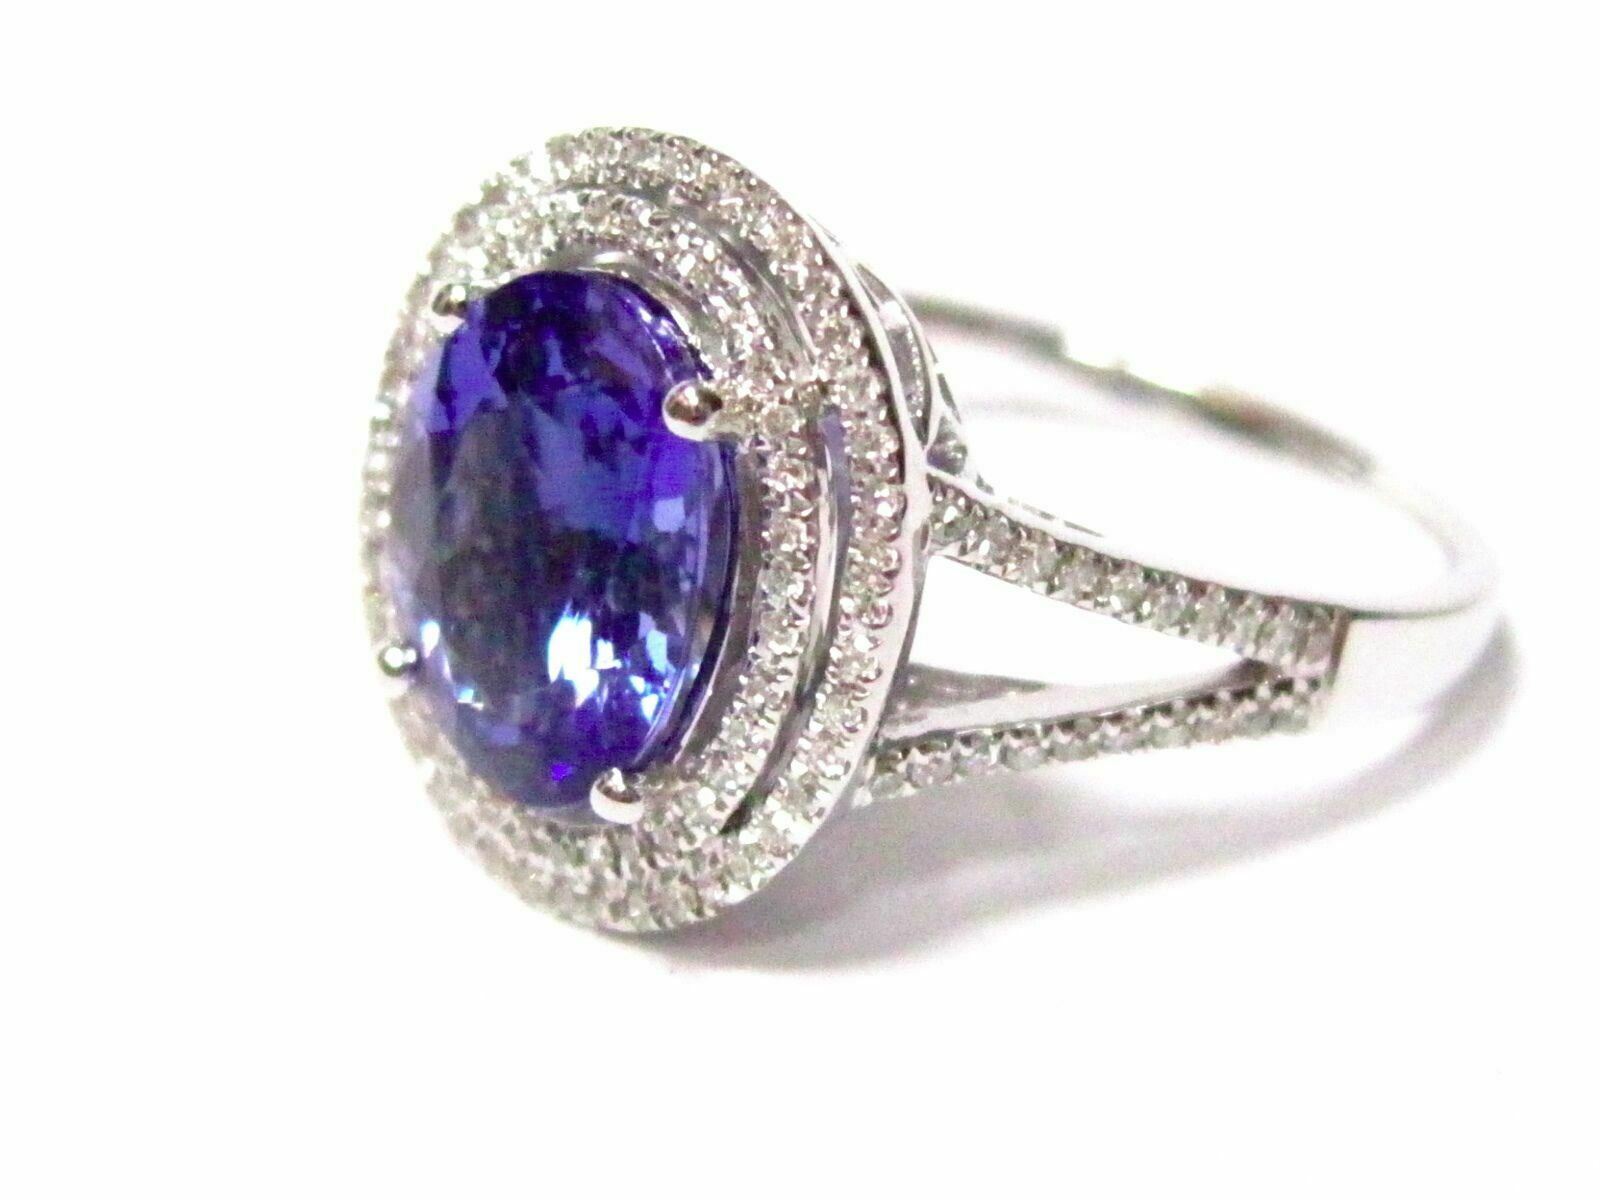 2.75 TCW Oval Tanzanite & Diamond Accents Cocktail/Anniversary Ring Size 7 14k